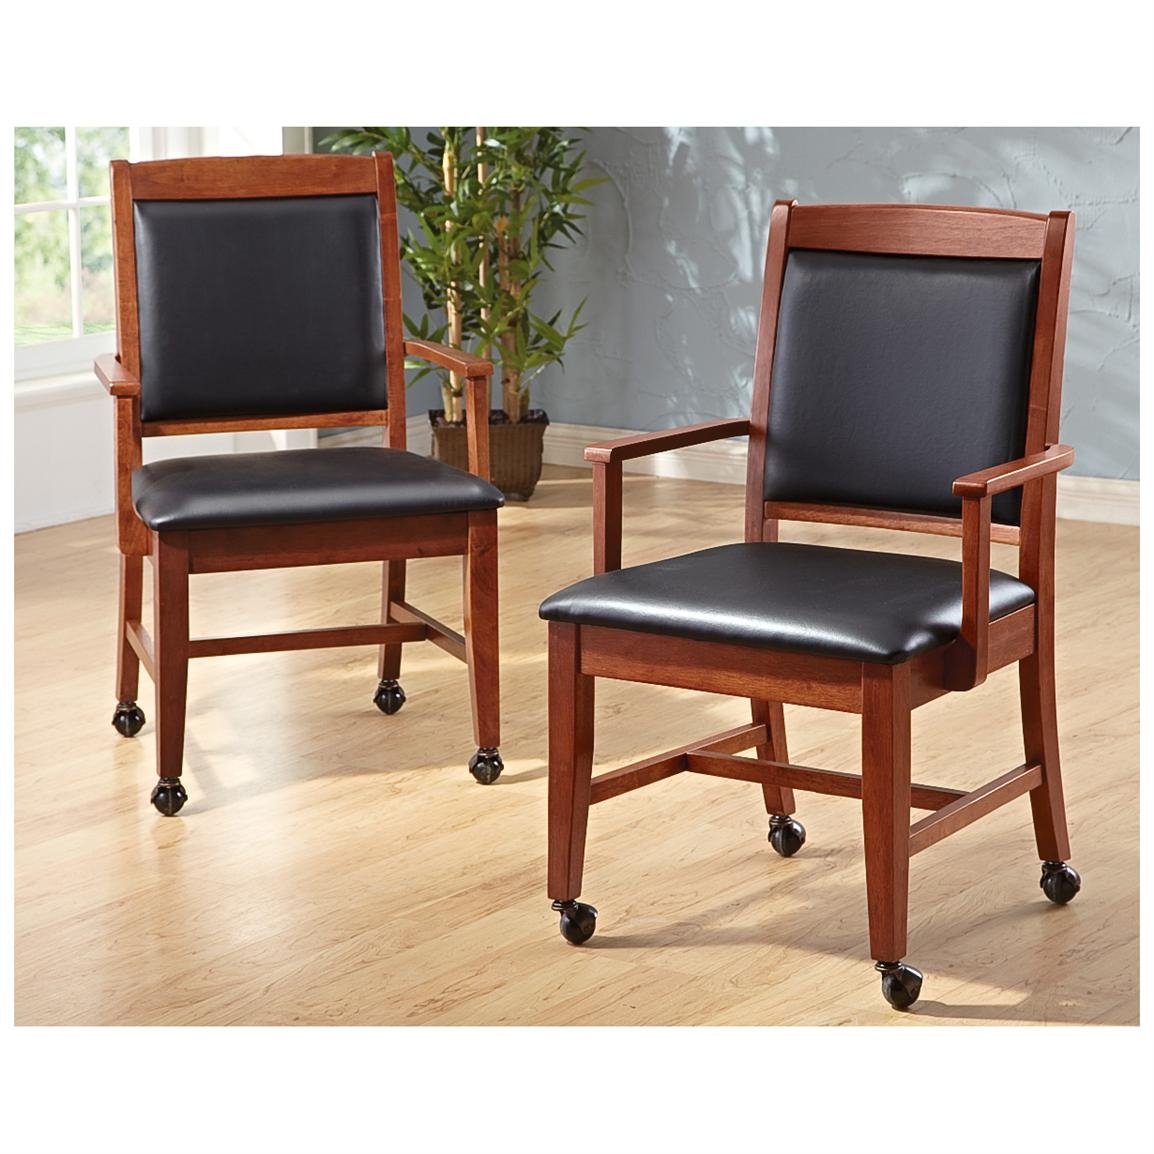 Dining Chairs With Casters Visualhunt, Padded Kitchen Chairs With Wheels